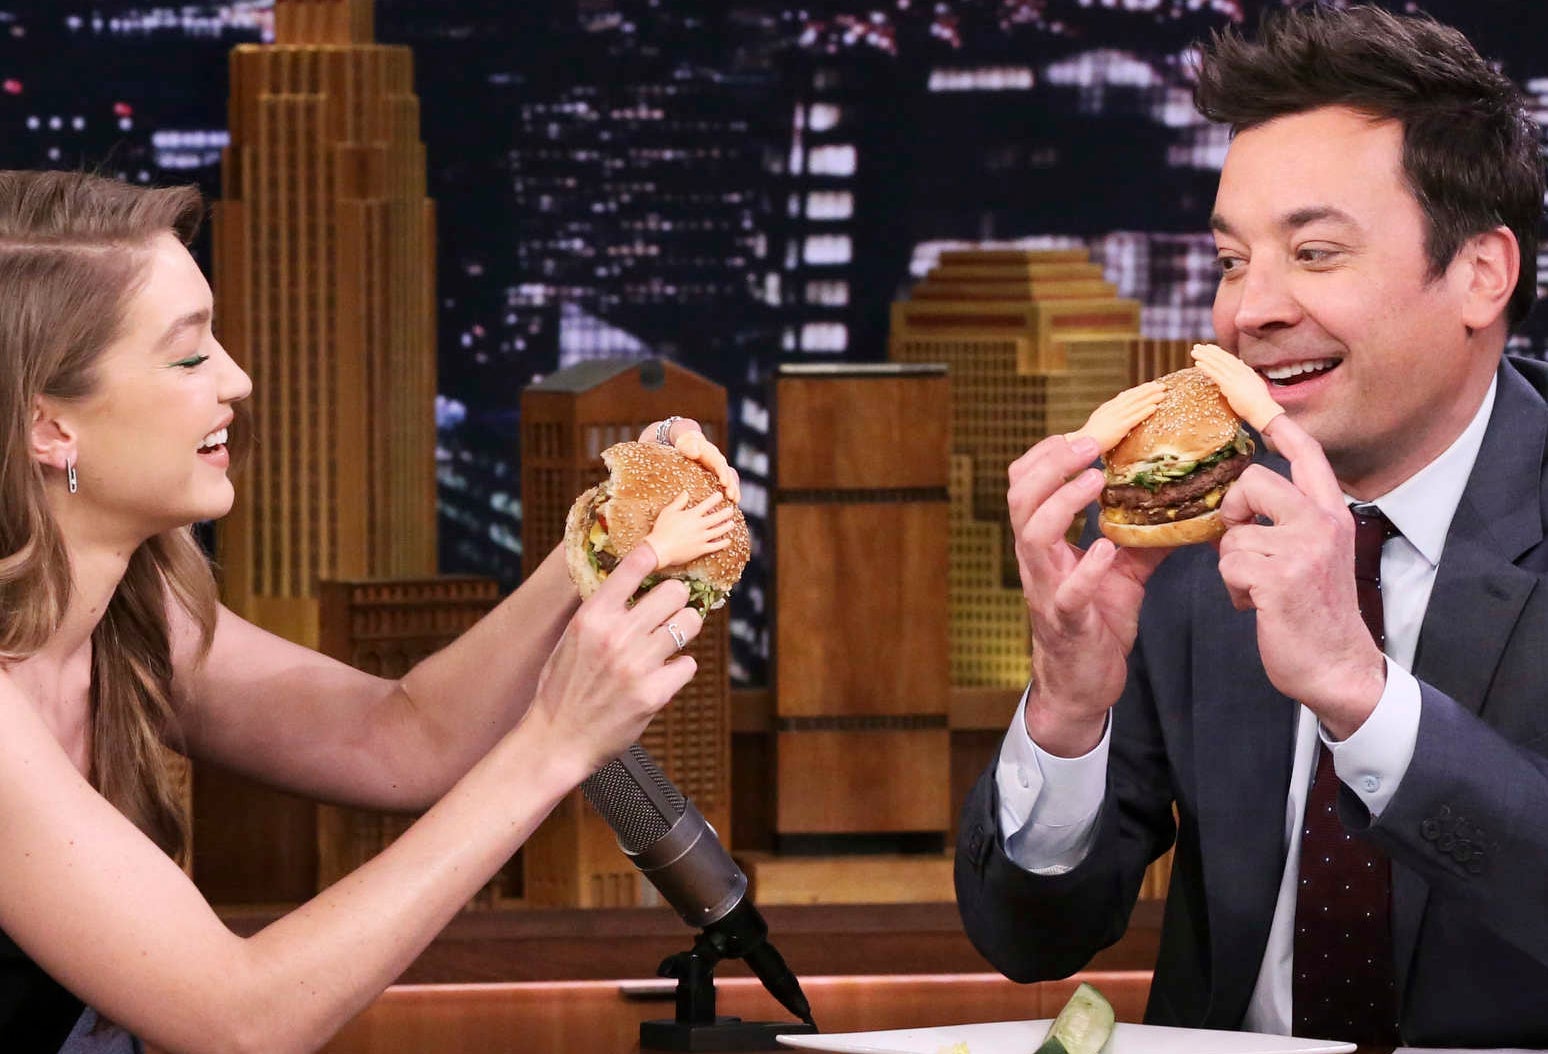 Gigi and jimmy Fallon eating burgers on his show